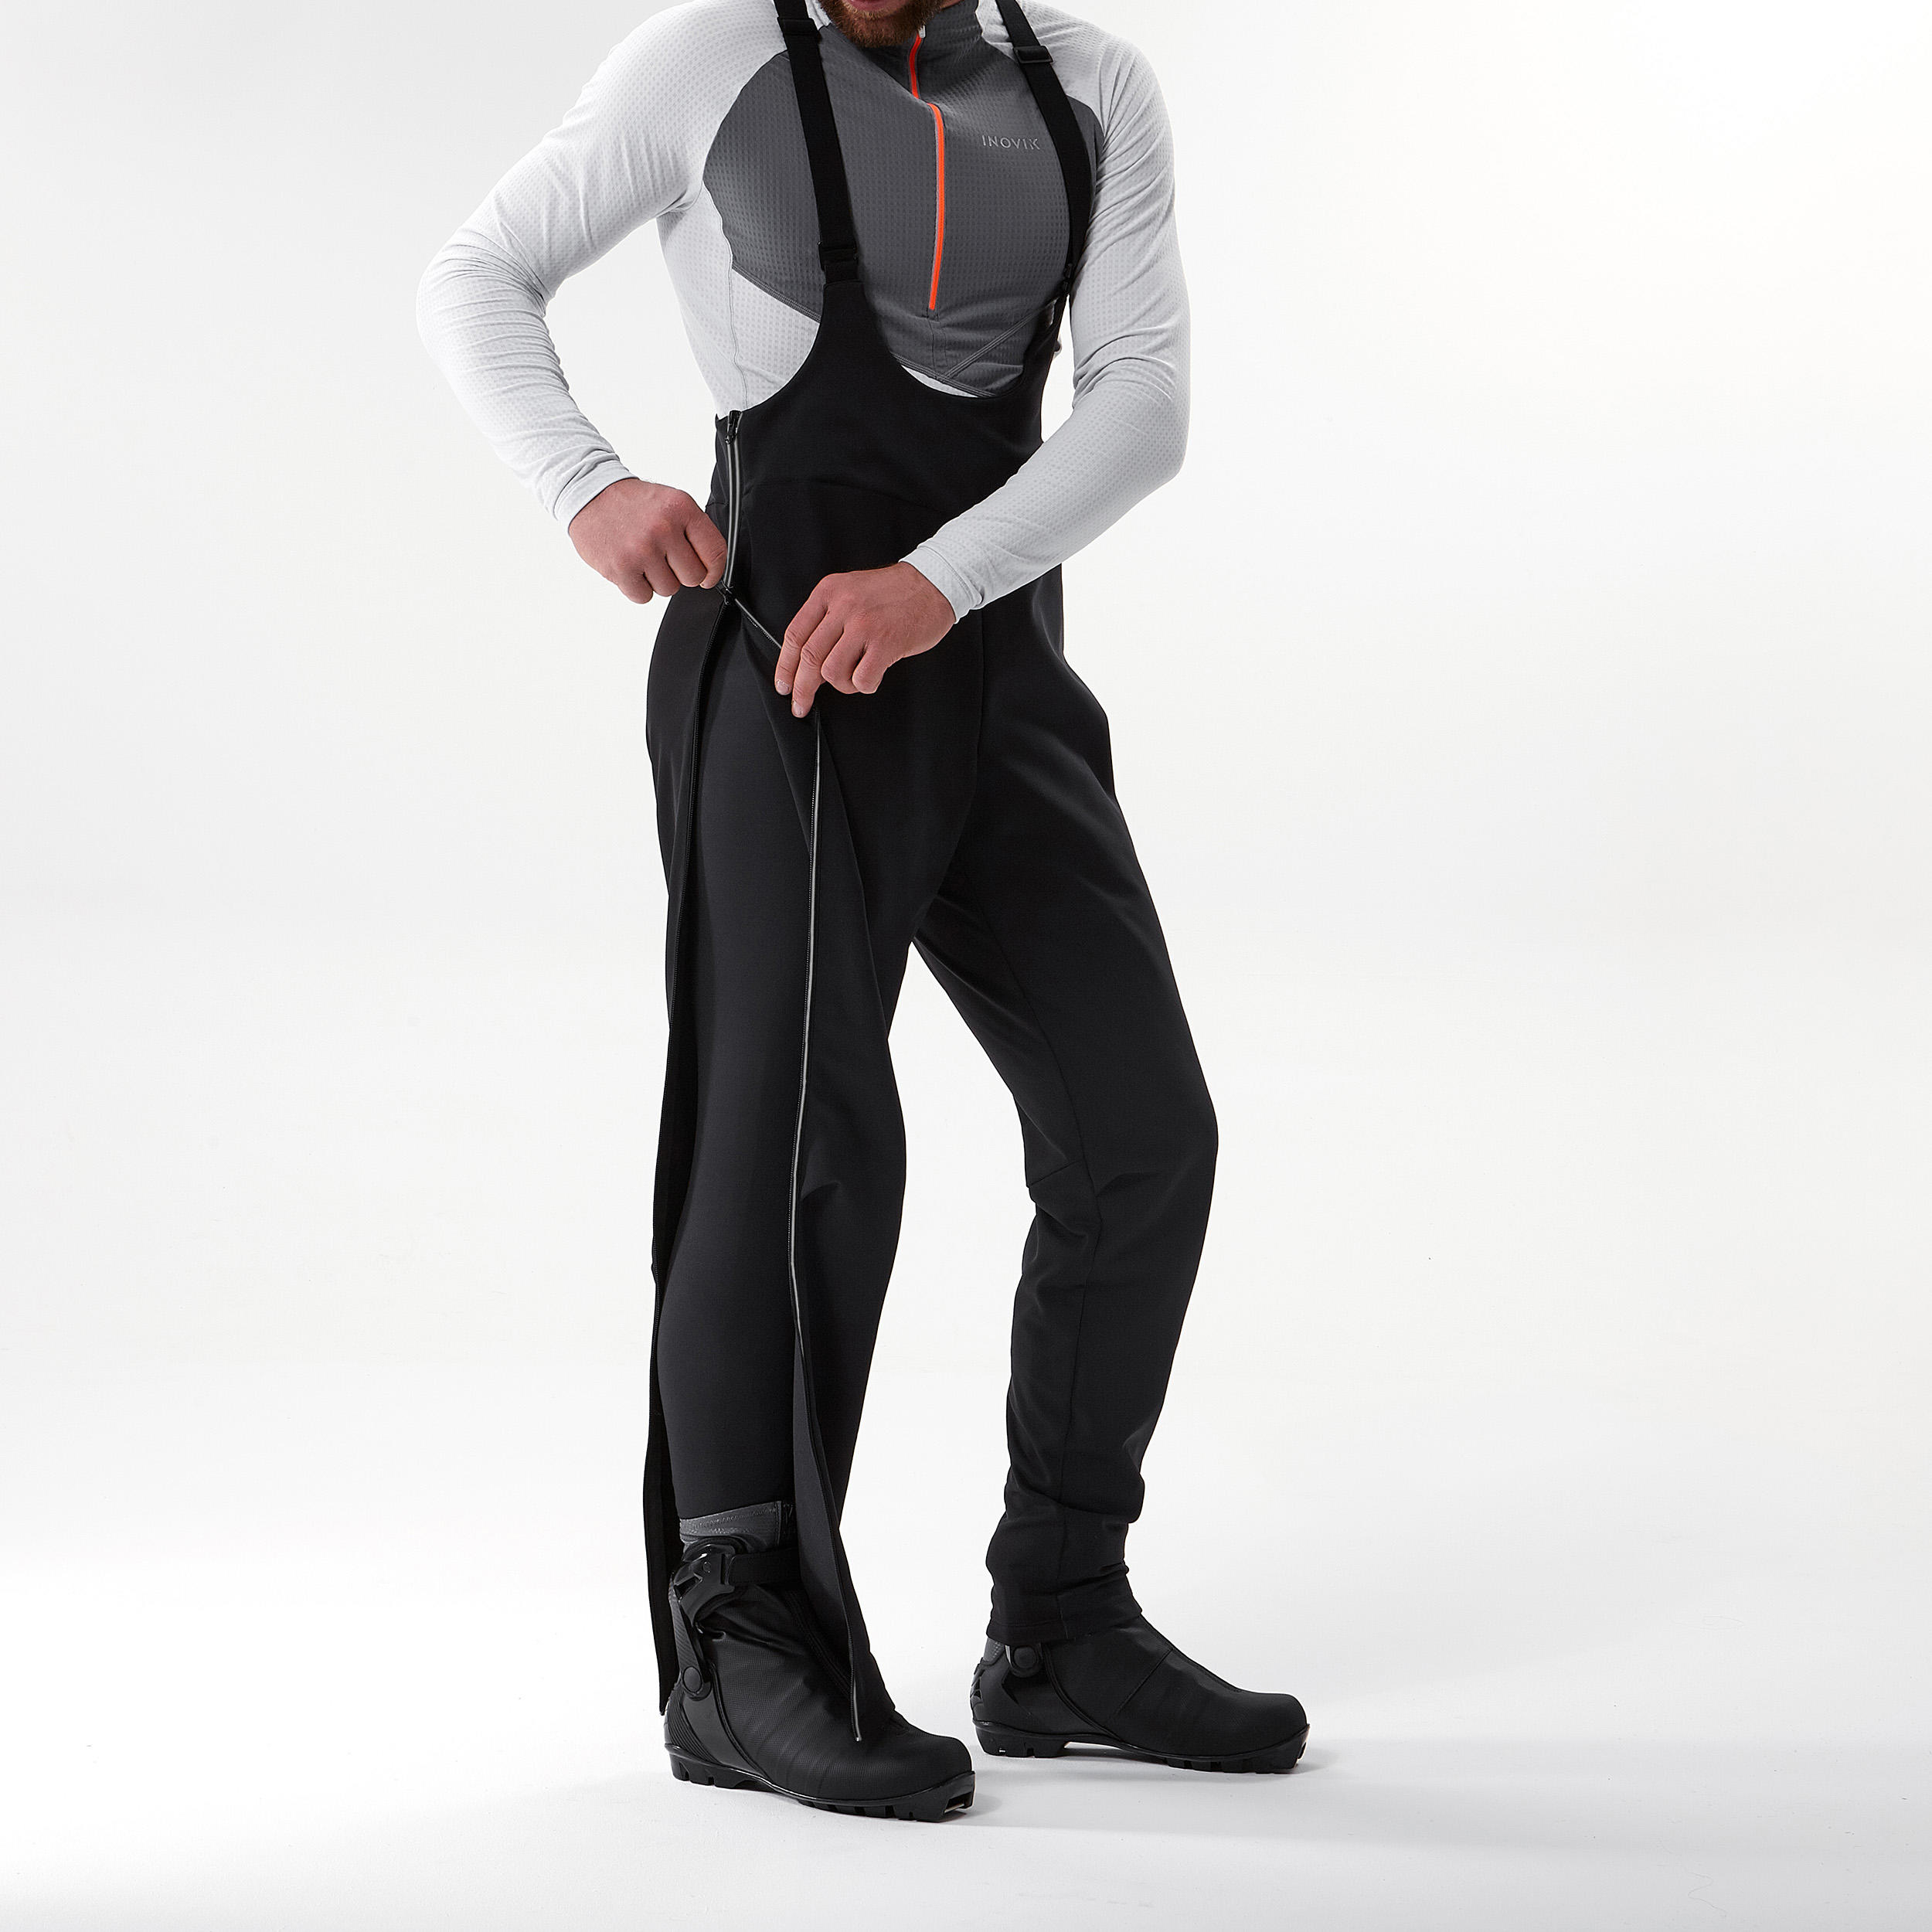 Men's Cross-Country Ski Over-Trousers XC S OVERP 900 - Black 8/9